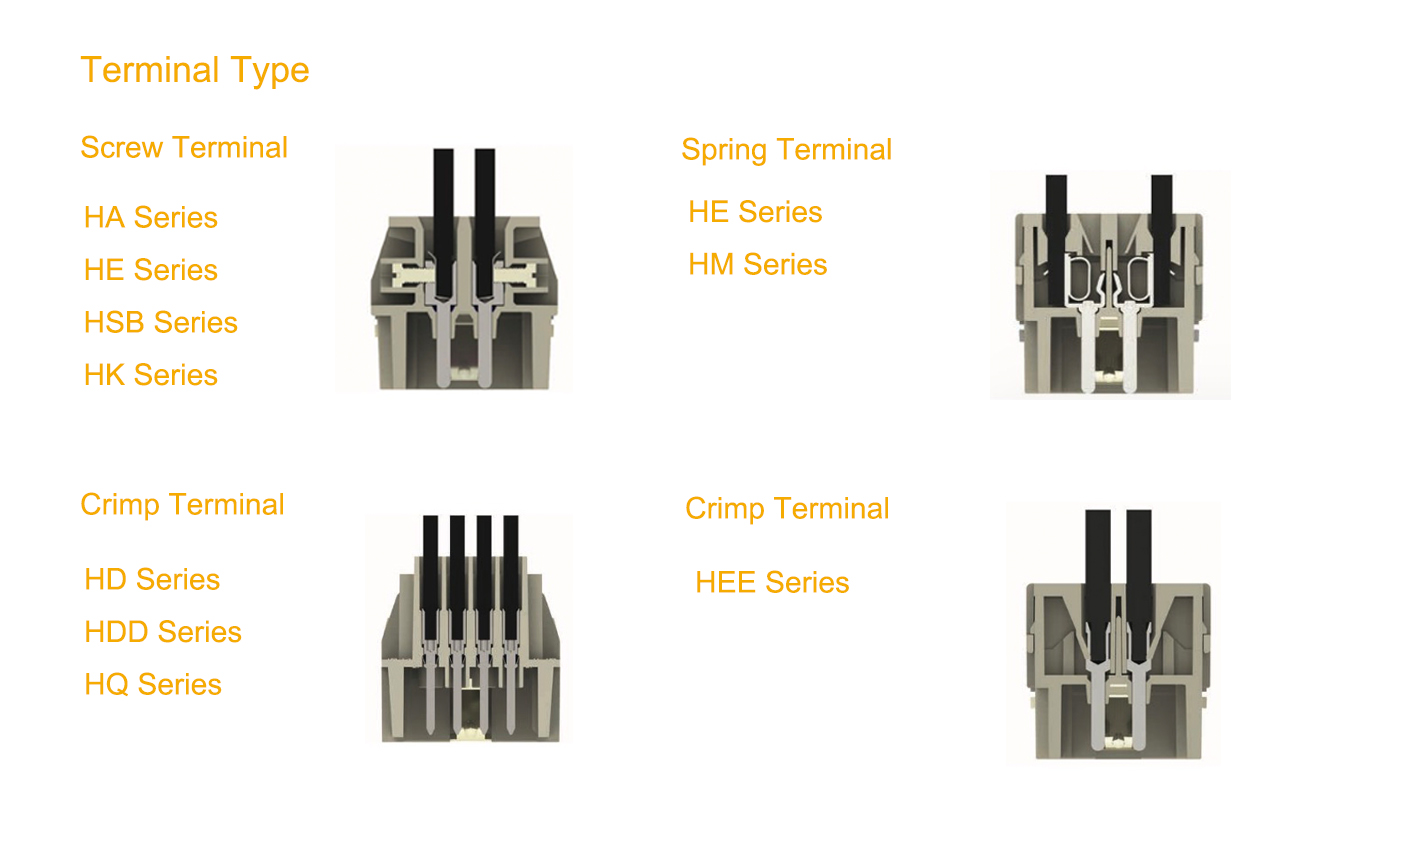 10pins Heavy Duty Power and Signal Connectors